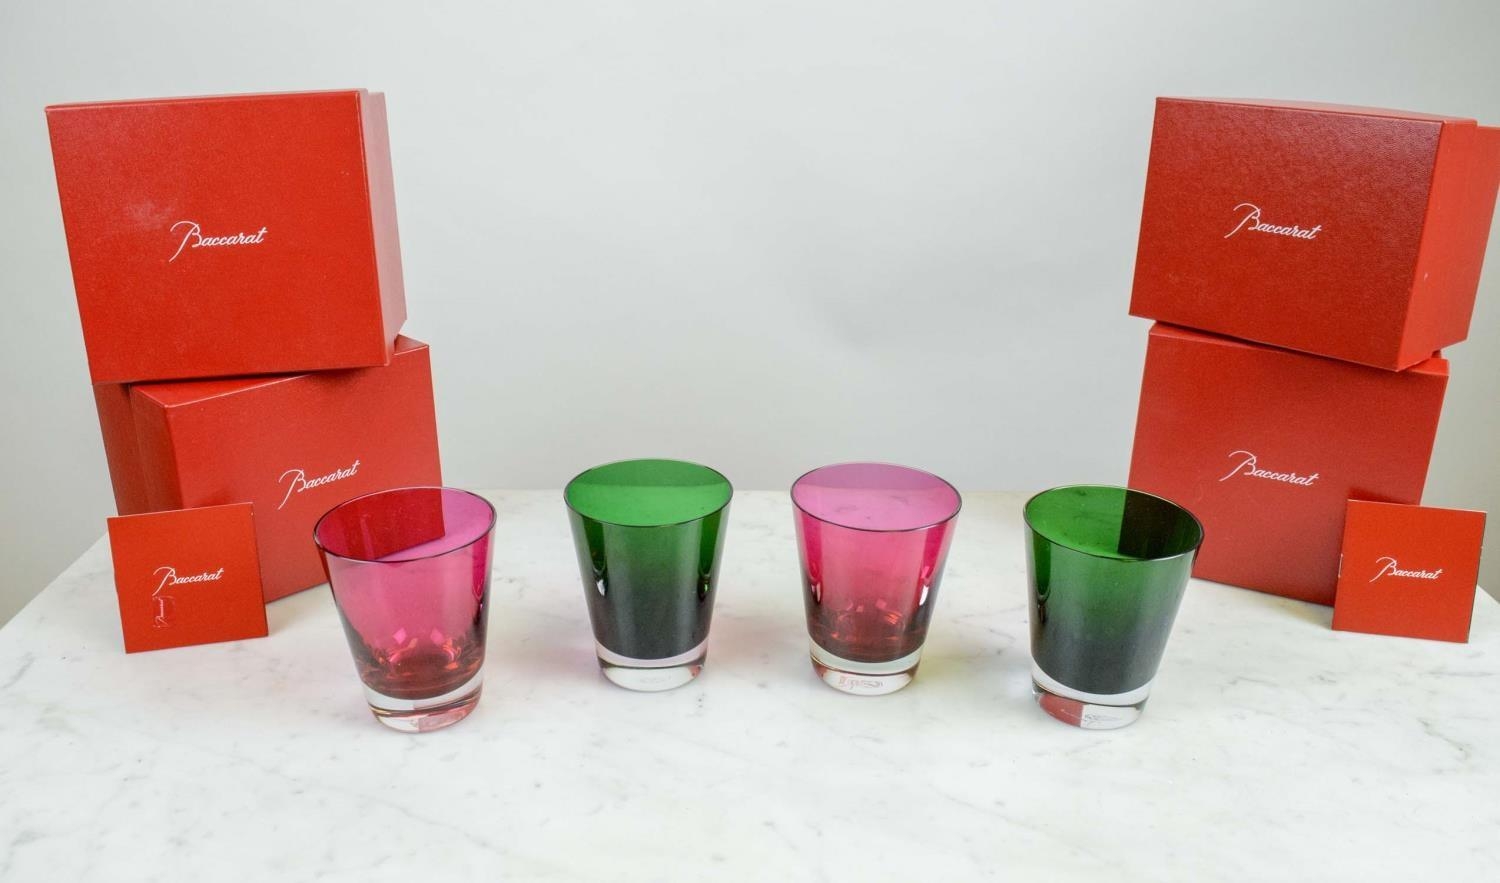 BACCARAT 'MOSAIQUE' TUMBLER GLASSES, a set of four, two red and two green in festive spirit - Image 3 of 7